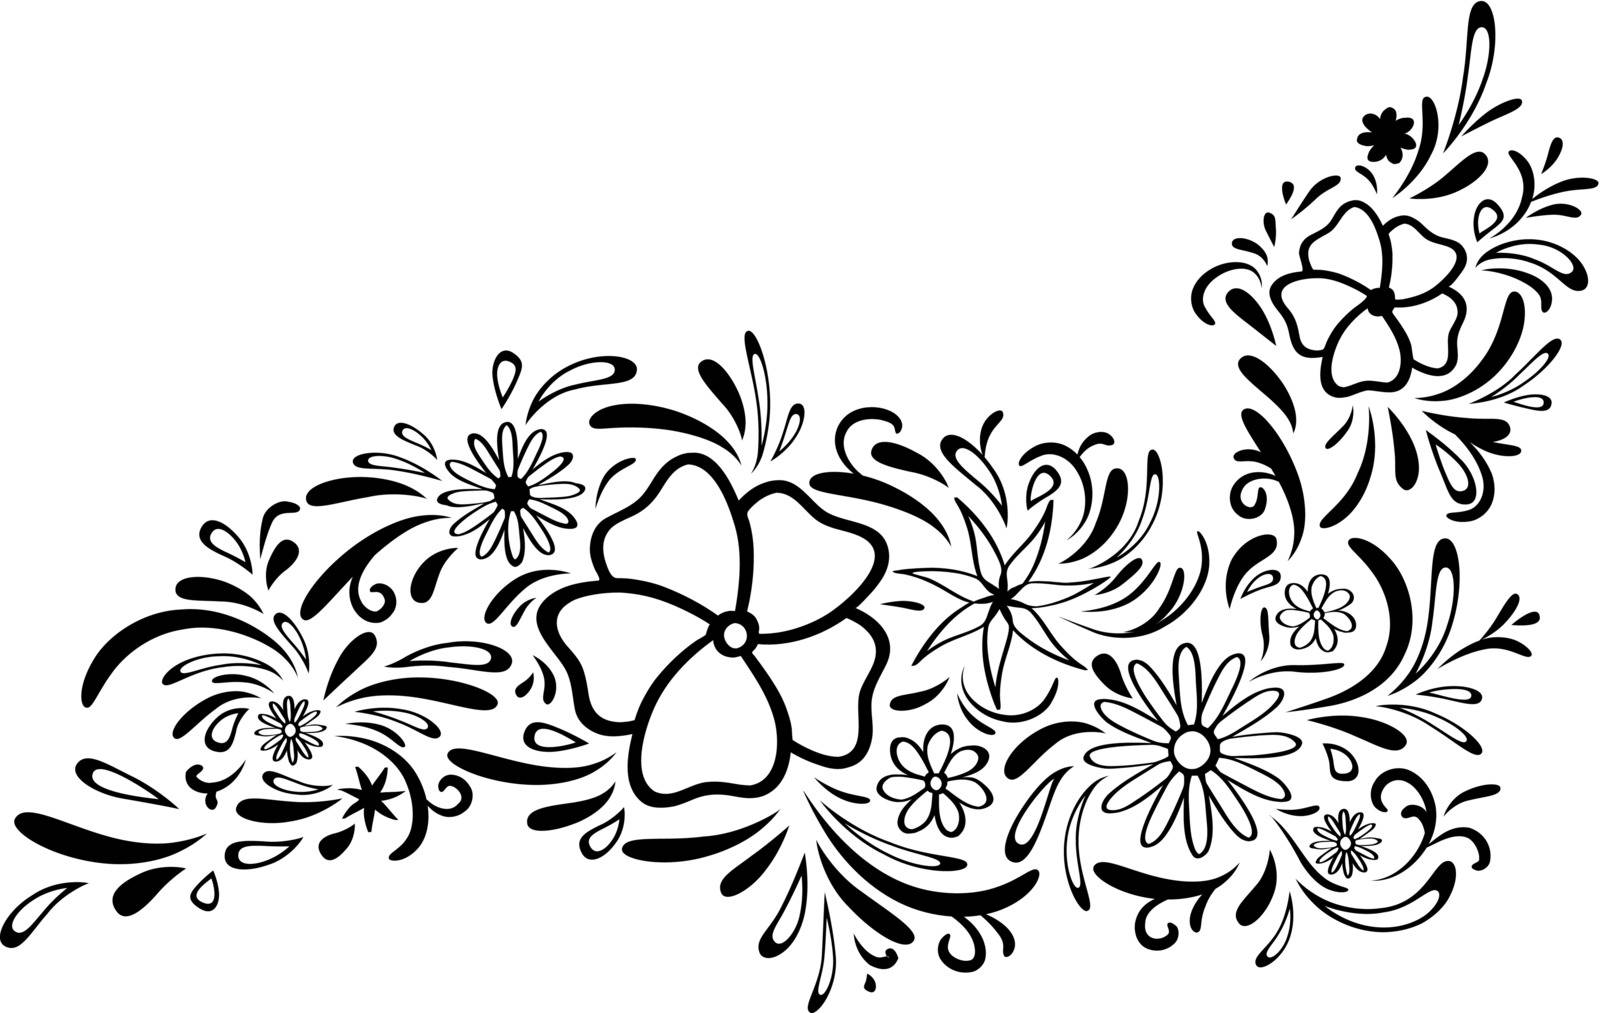 Abstract Floral Border, Copyspace For Your Text